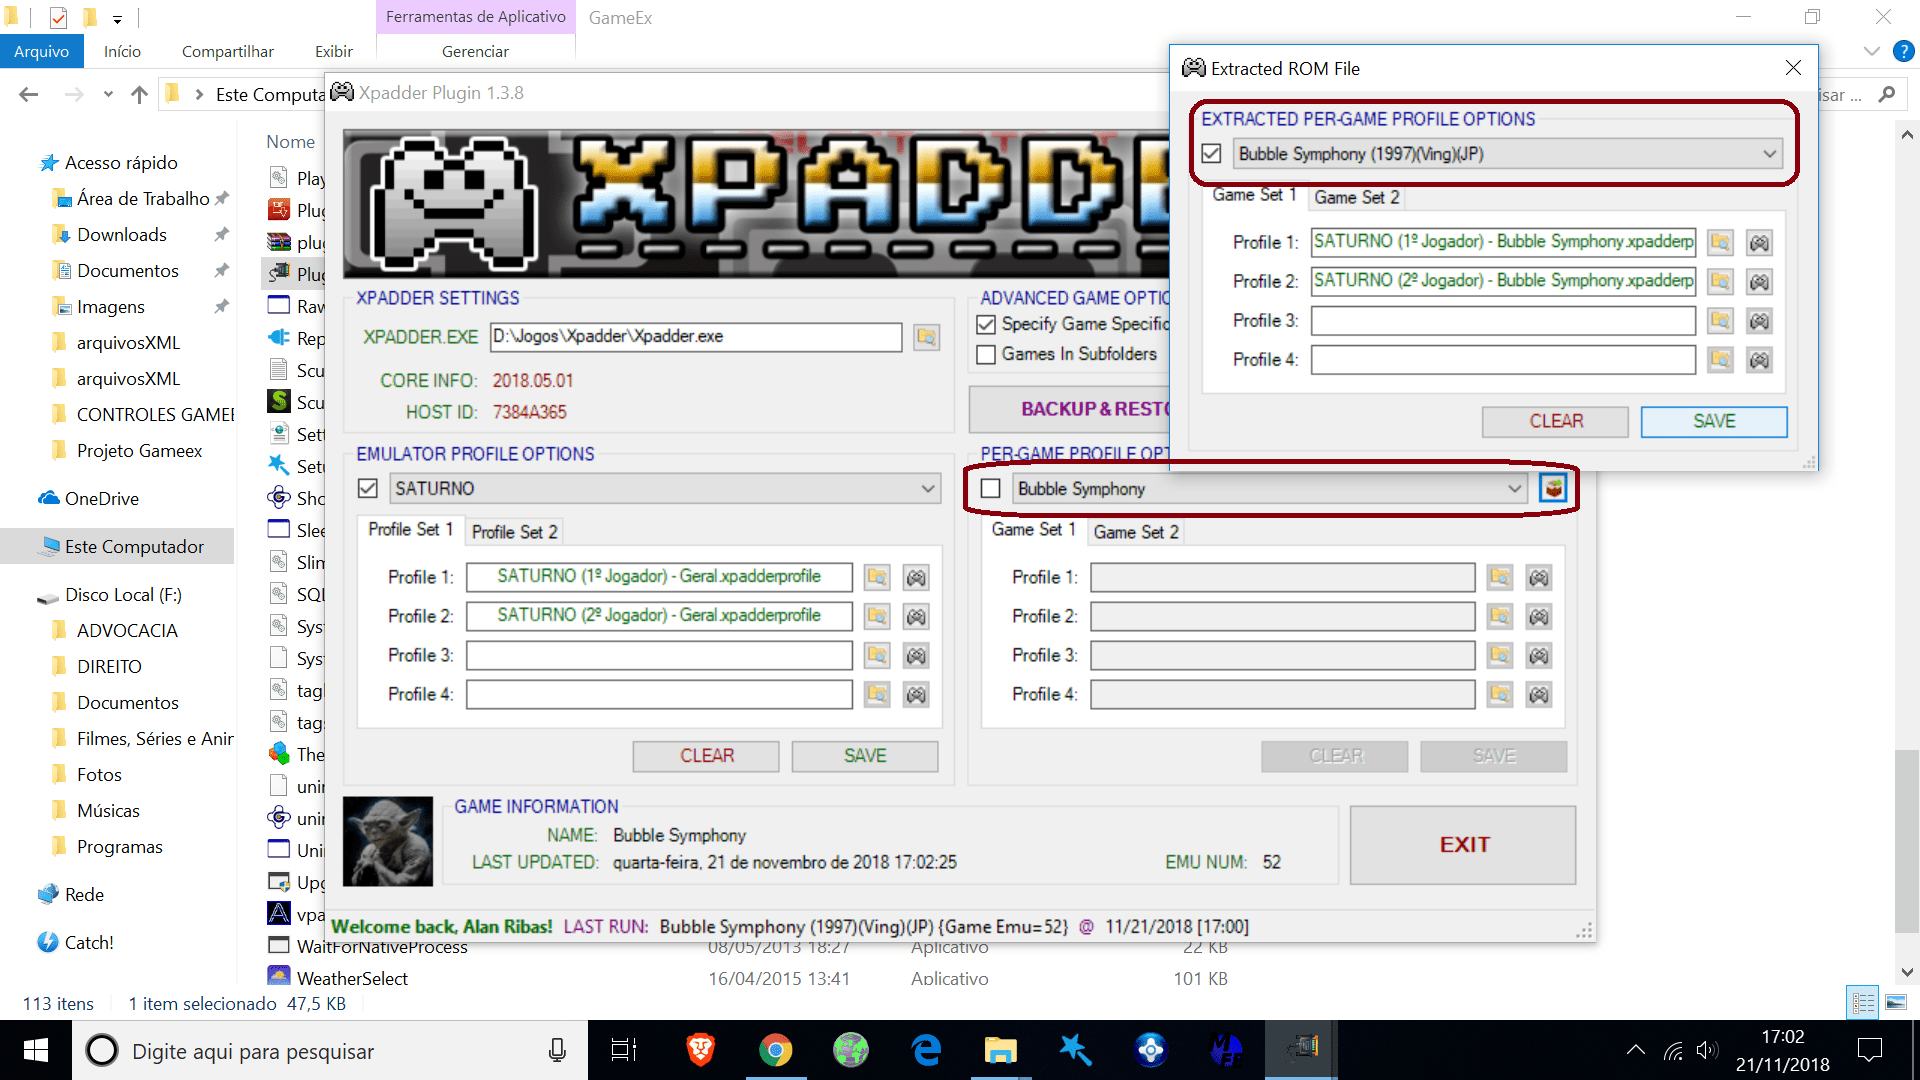 Xpadder configuration is Lost - General - Spesoft Forums